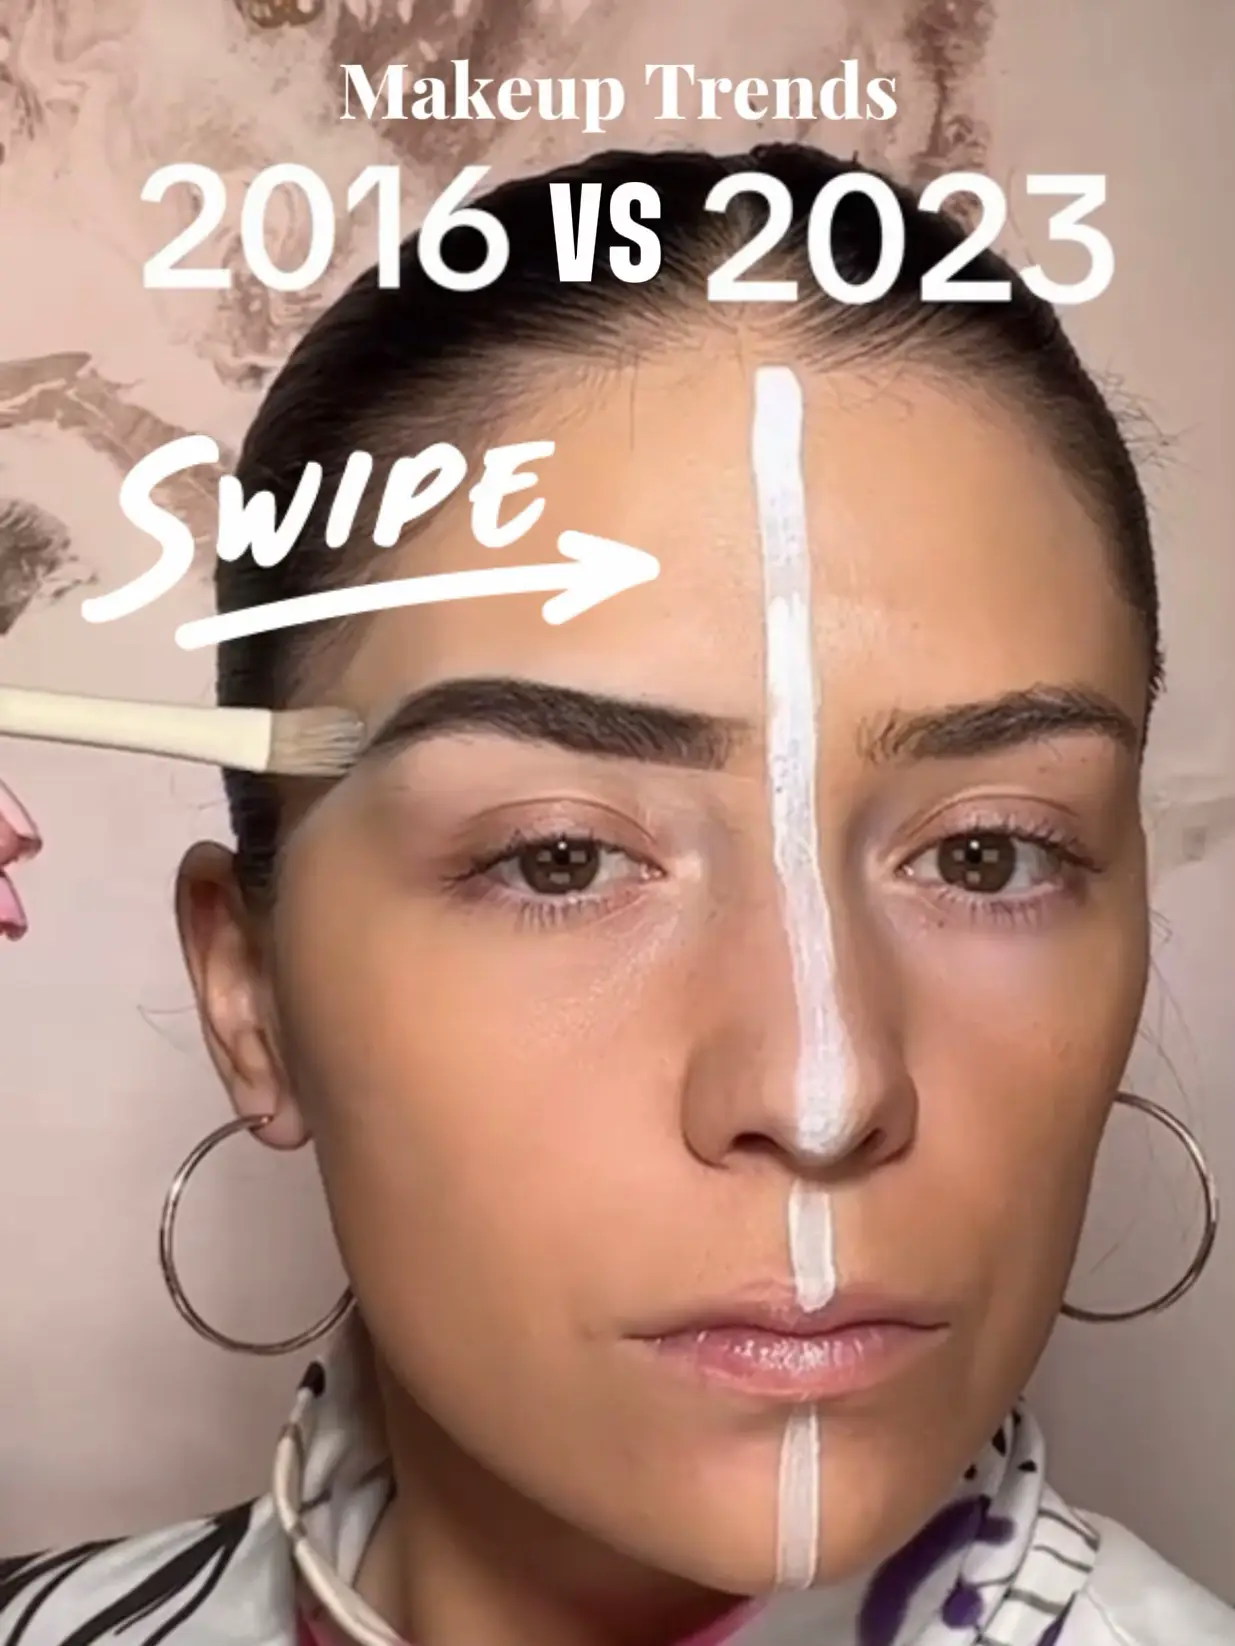 Summer 2022 Makeup Trends: Smudged Liner, Coral Blush, and Extra Glossy Lips